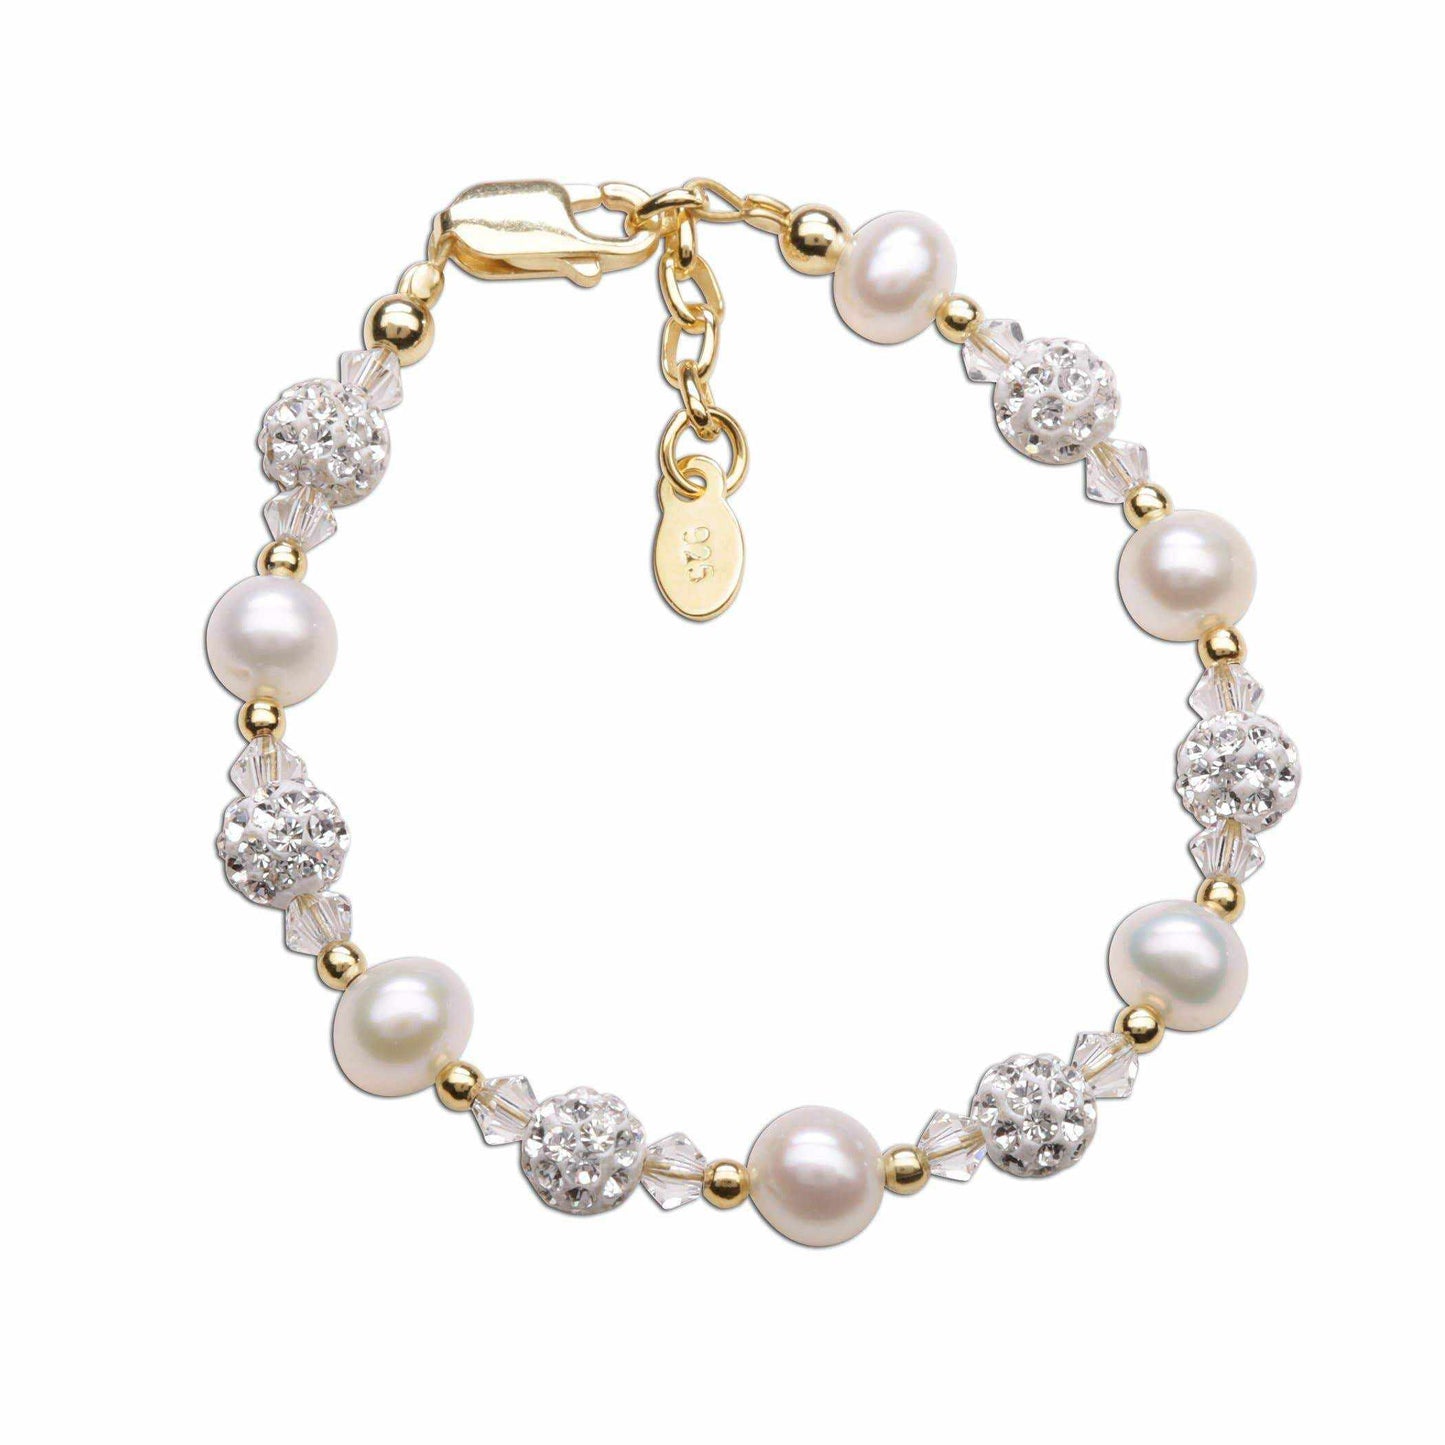 Charlotte | 14K Gold Plated Pearl Baby or Child's Bracelet